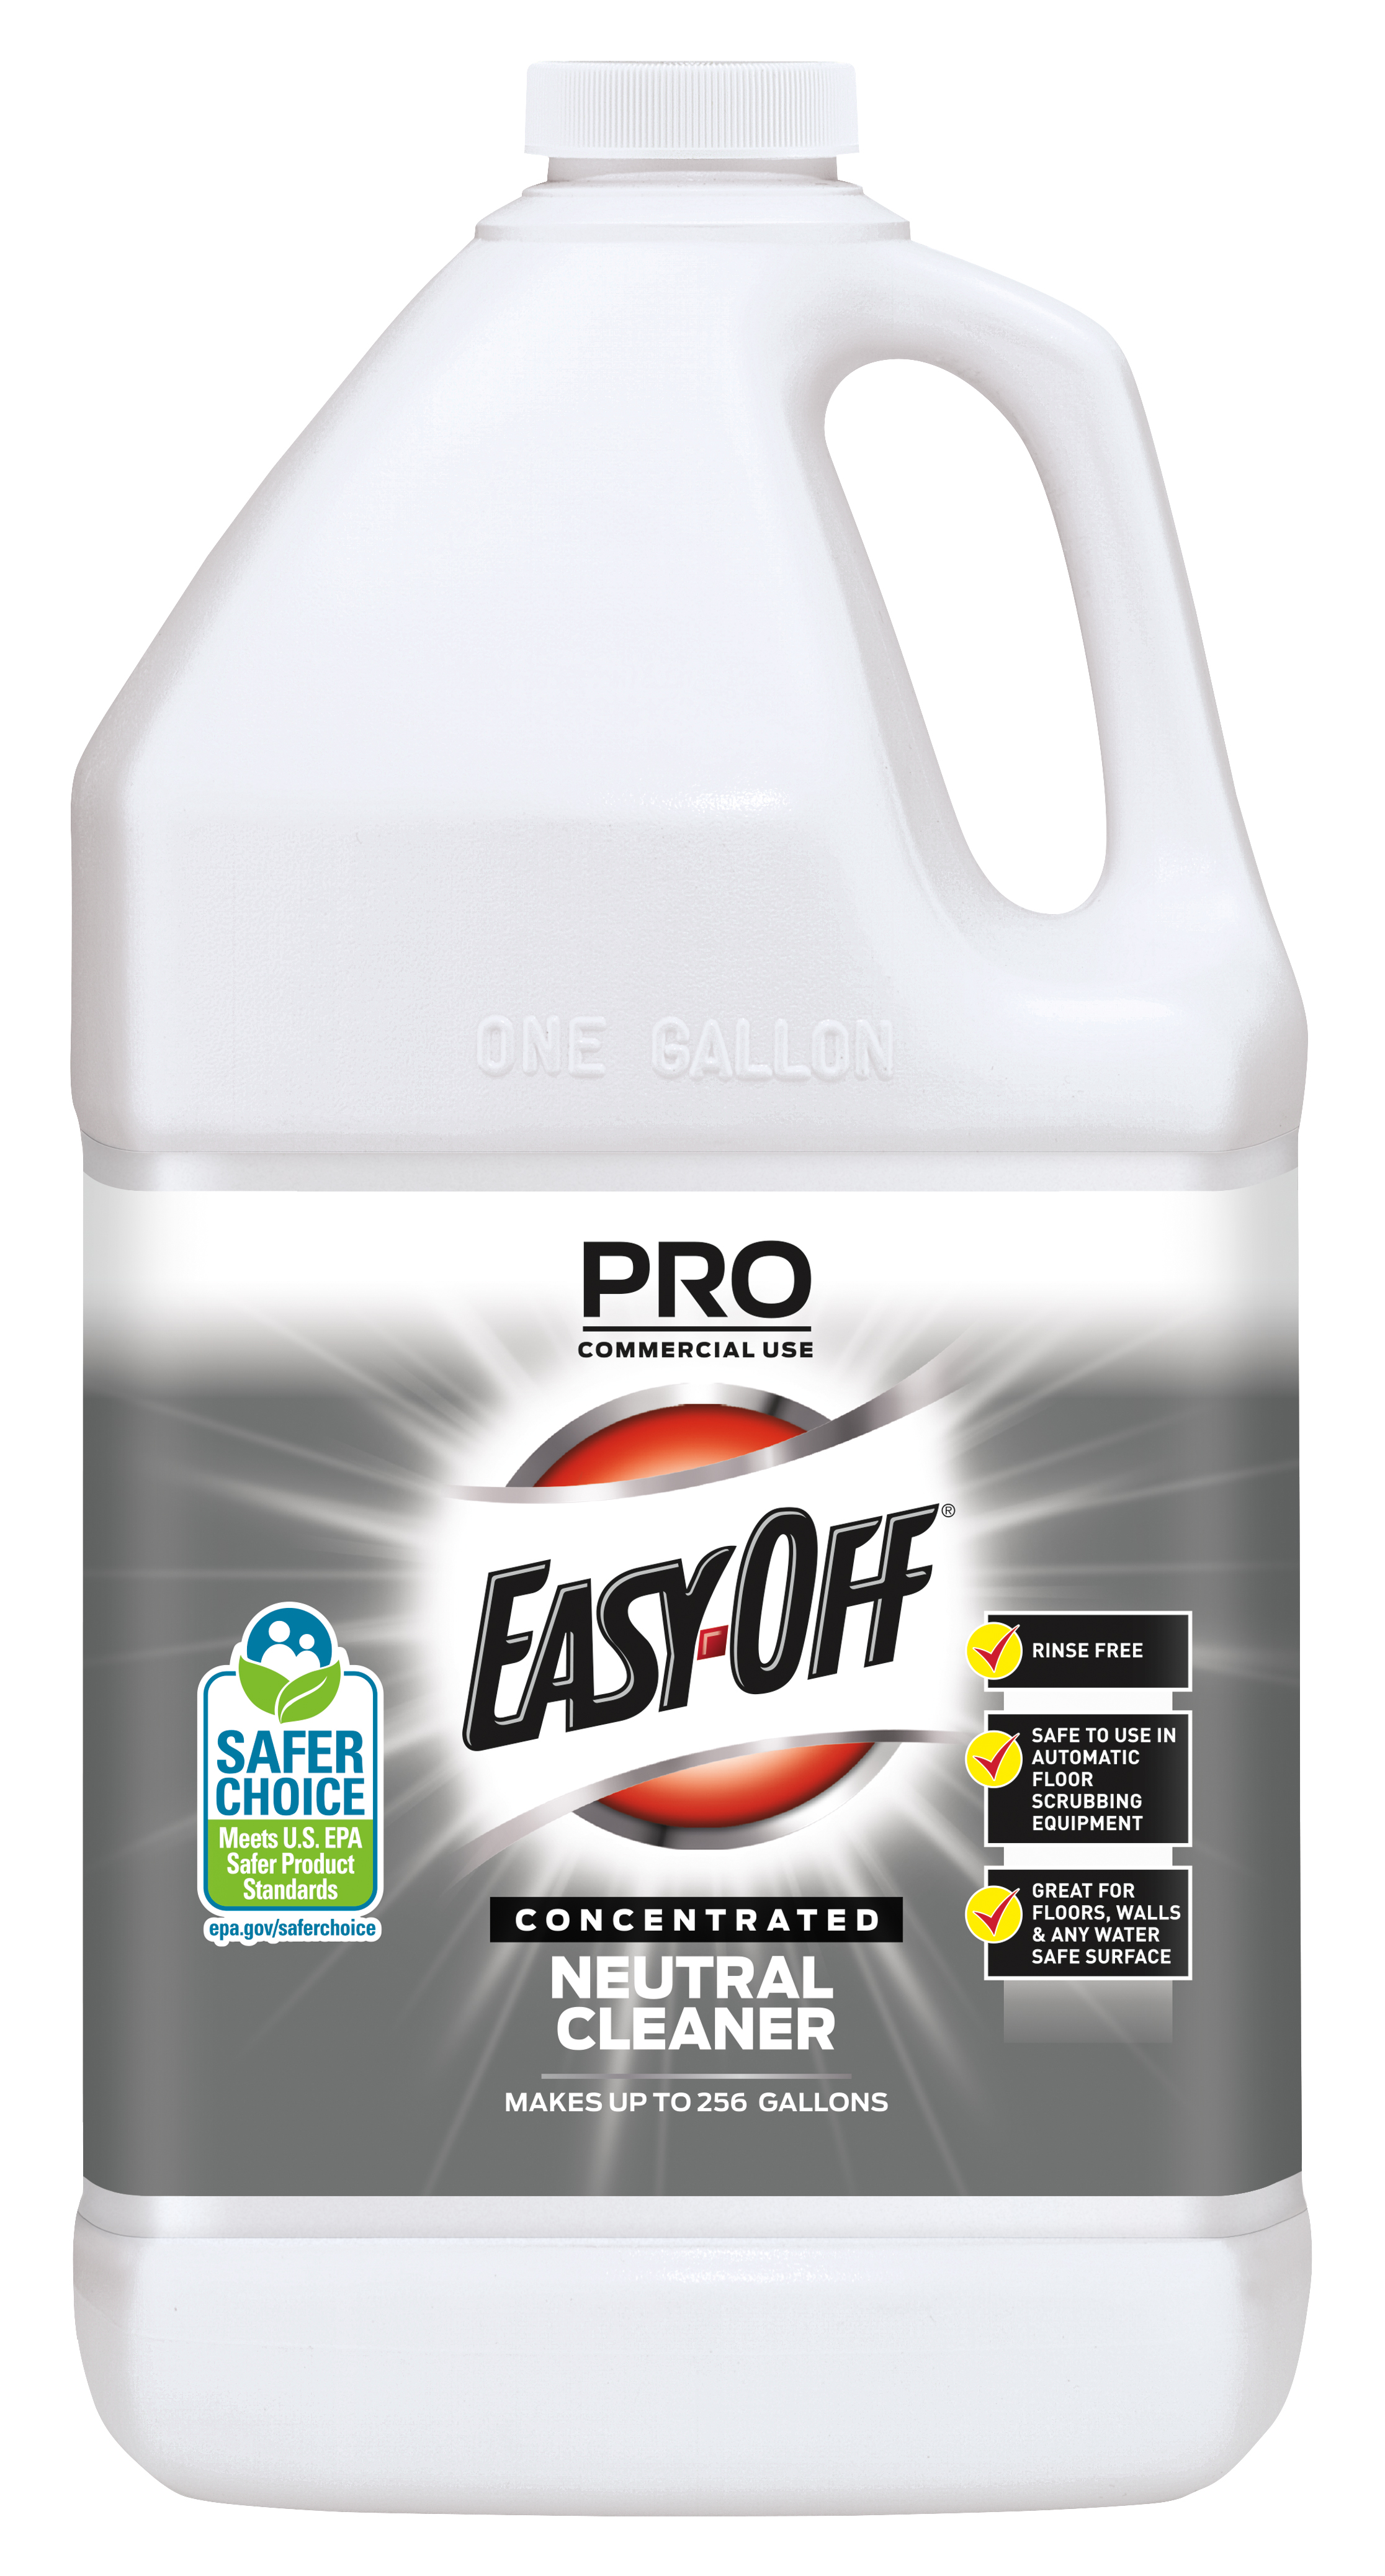 Professional EASY-OFF® Concentrated Neutral Cleaner